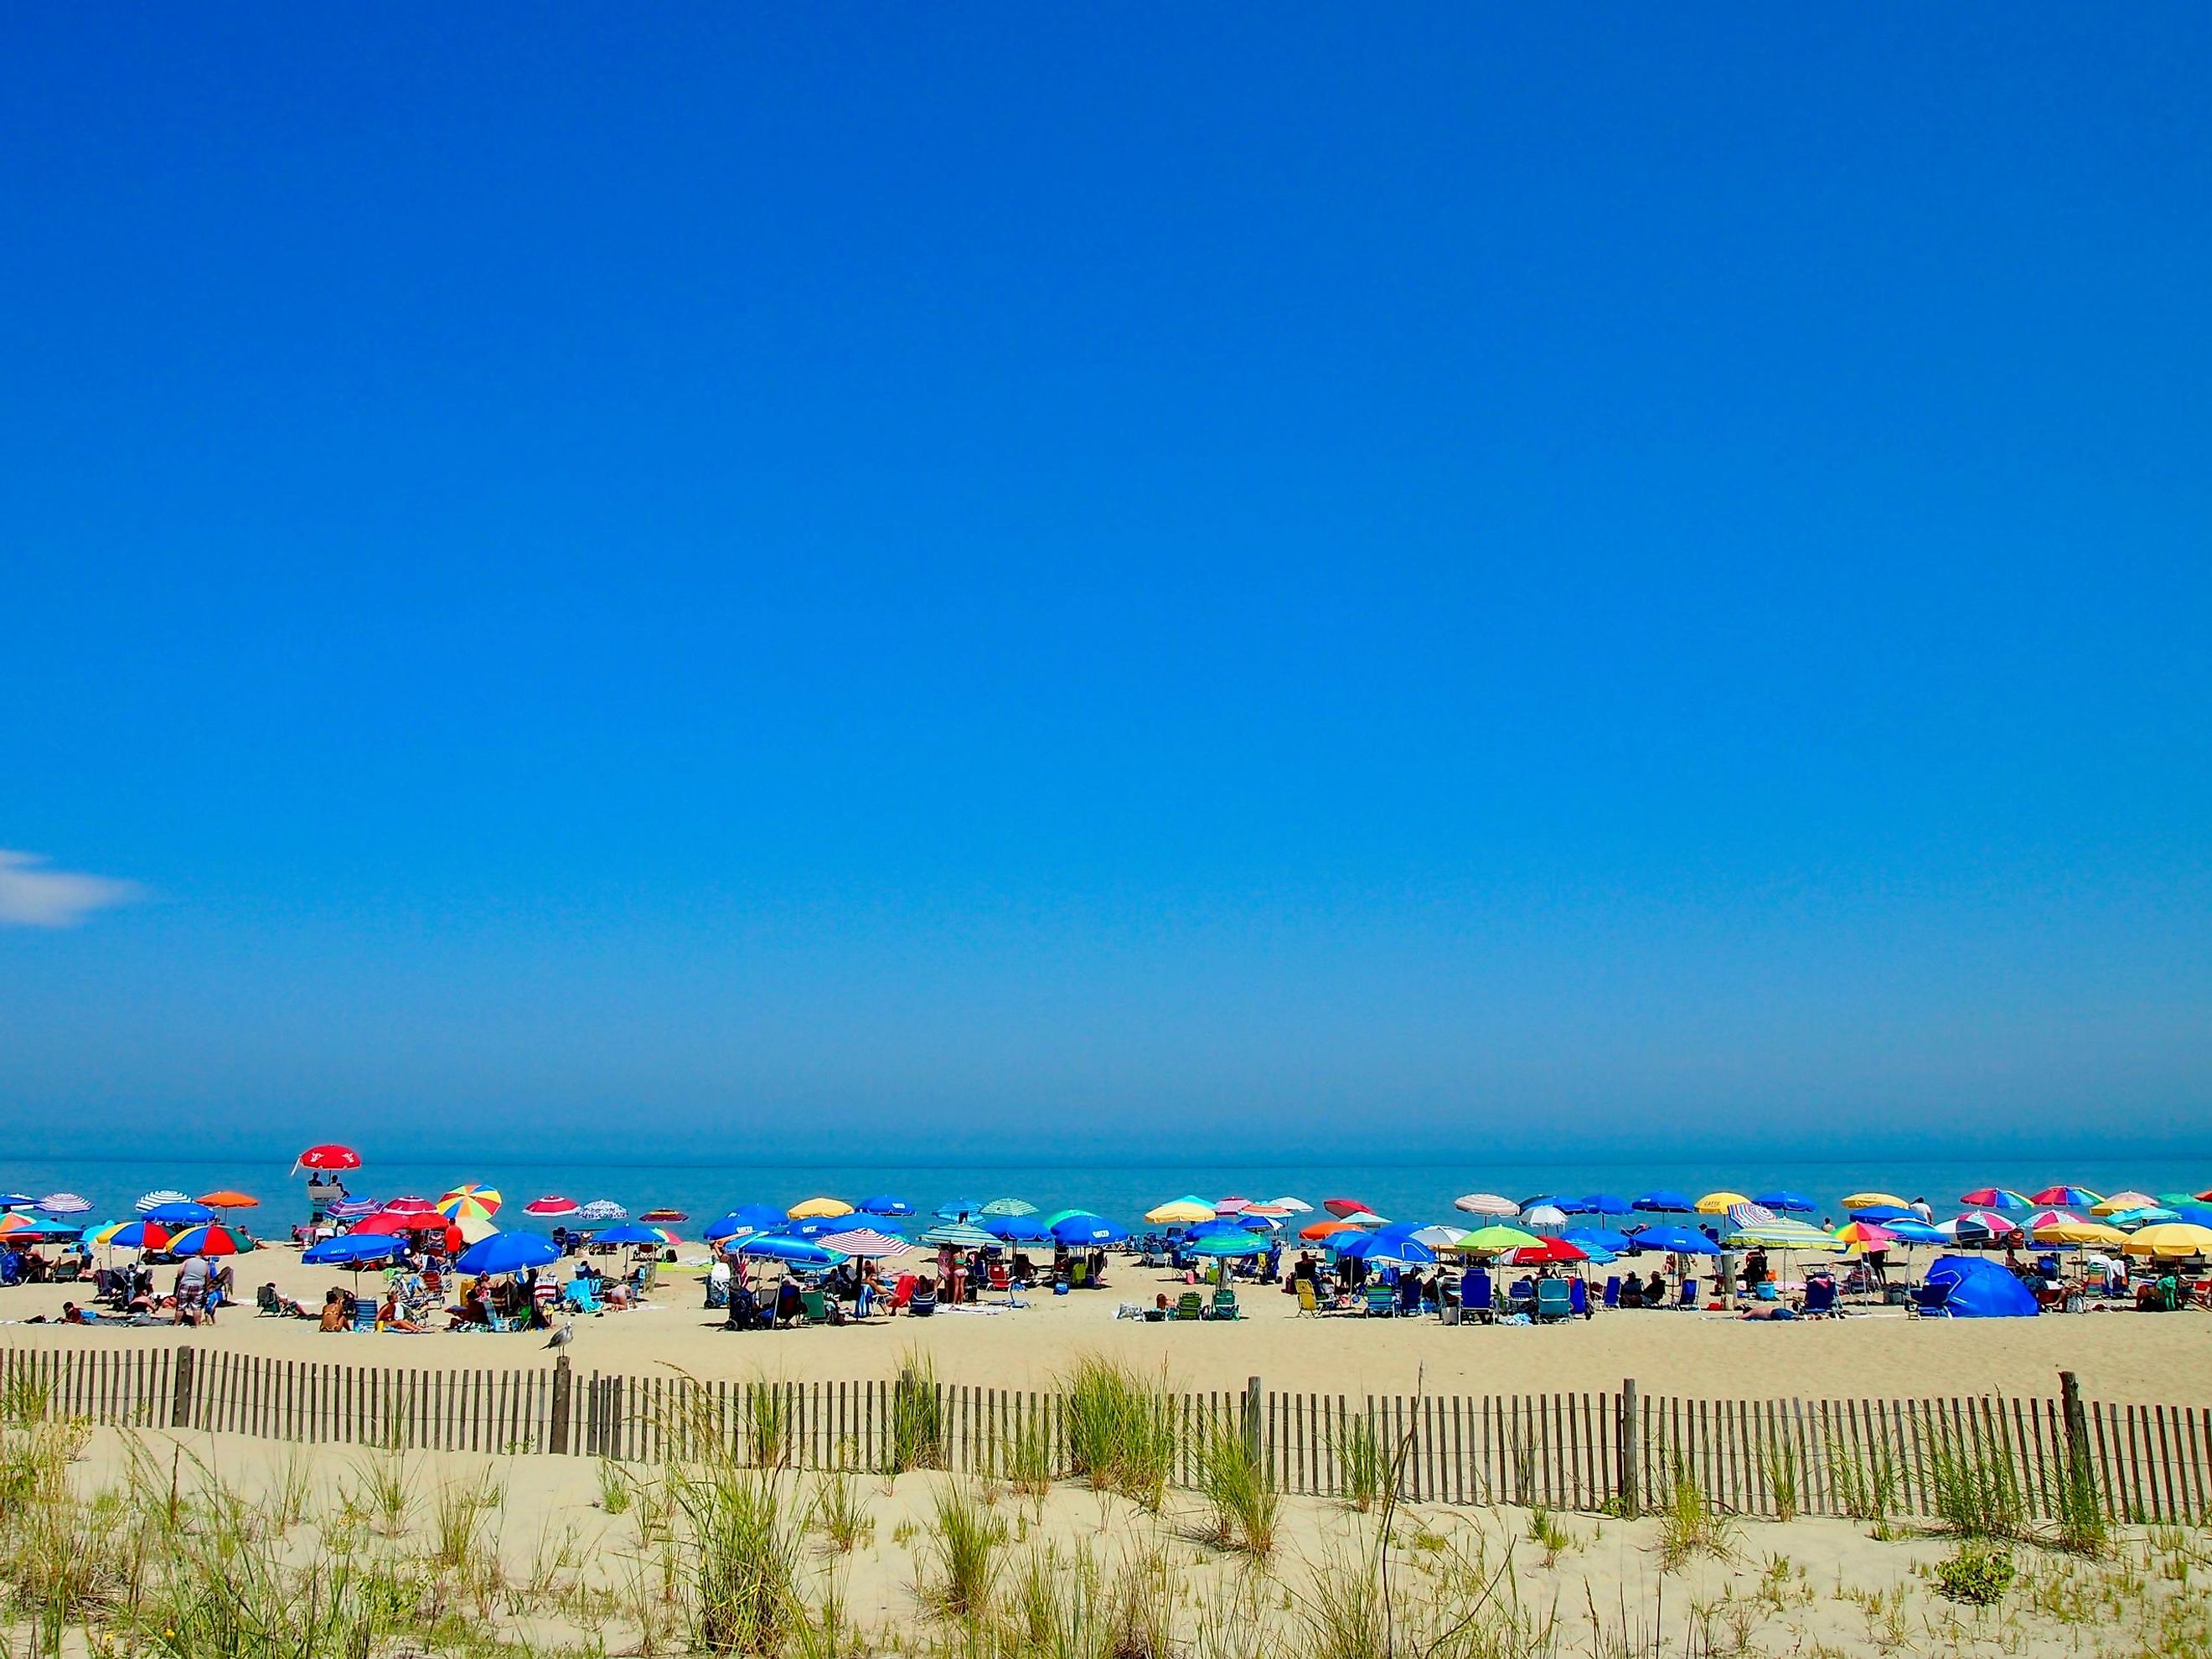 A summer afternoon in Rehoboth Beach.